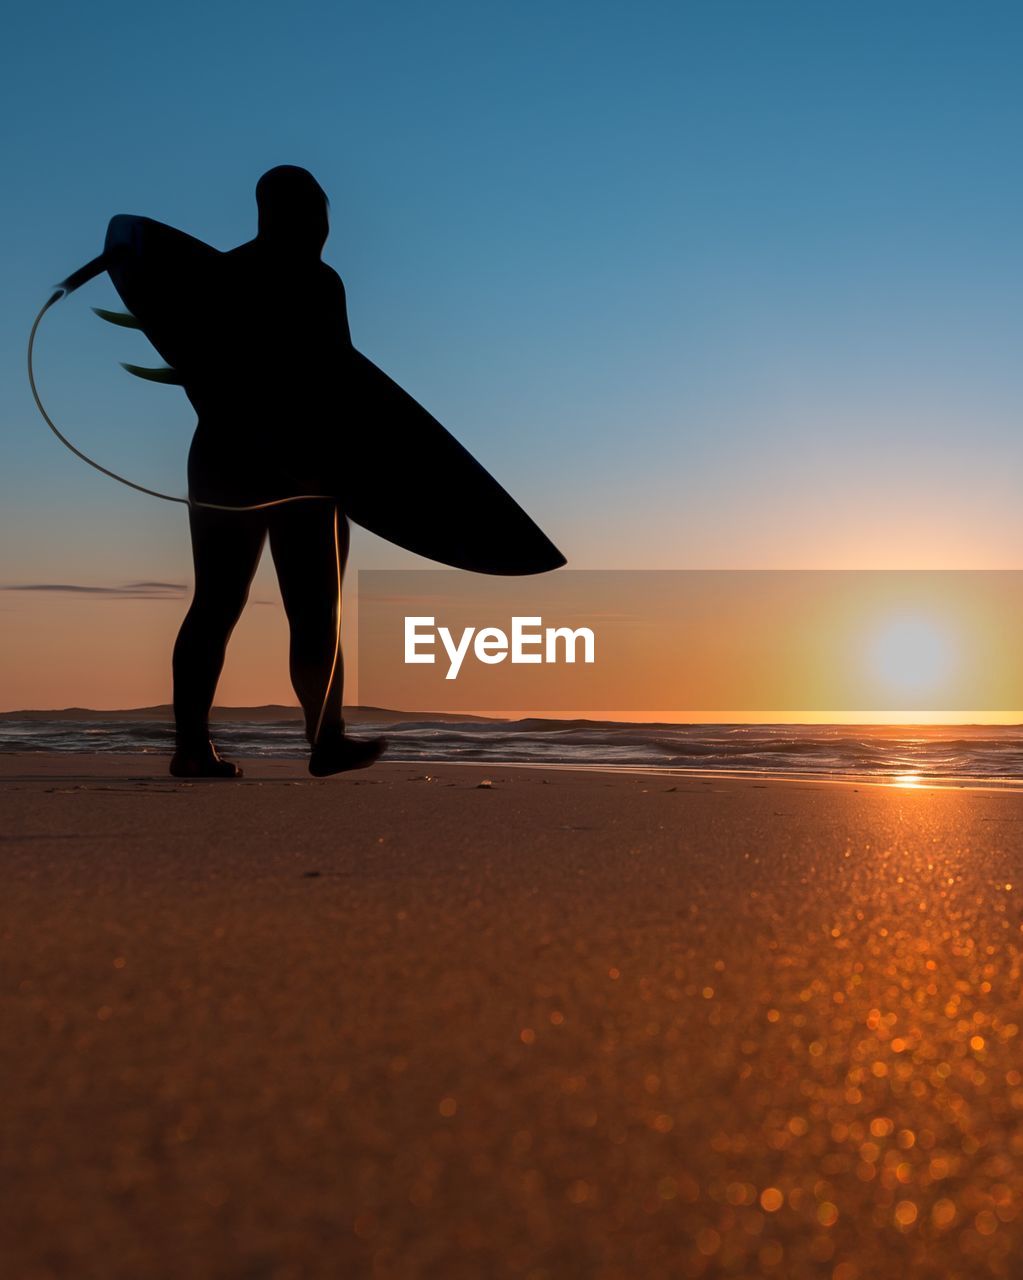 Silhouette man holding surfboard at beach against sky during sunset